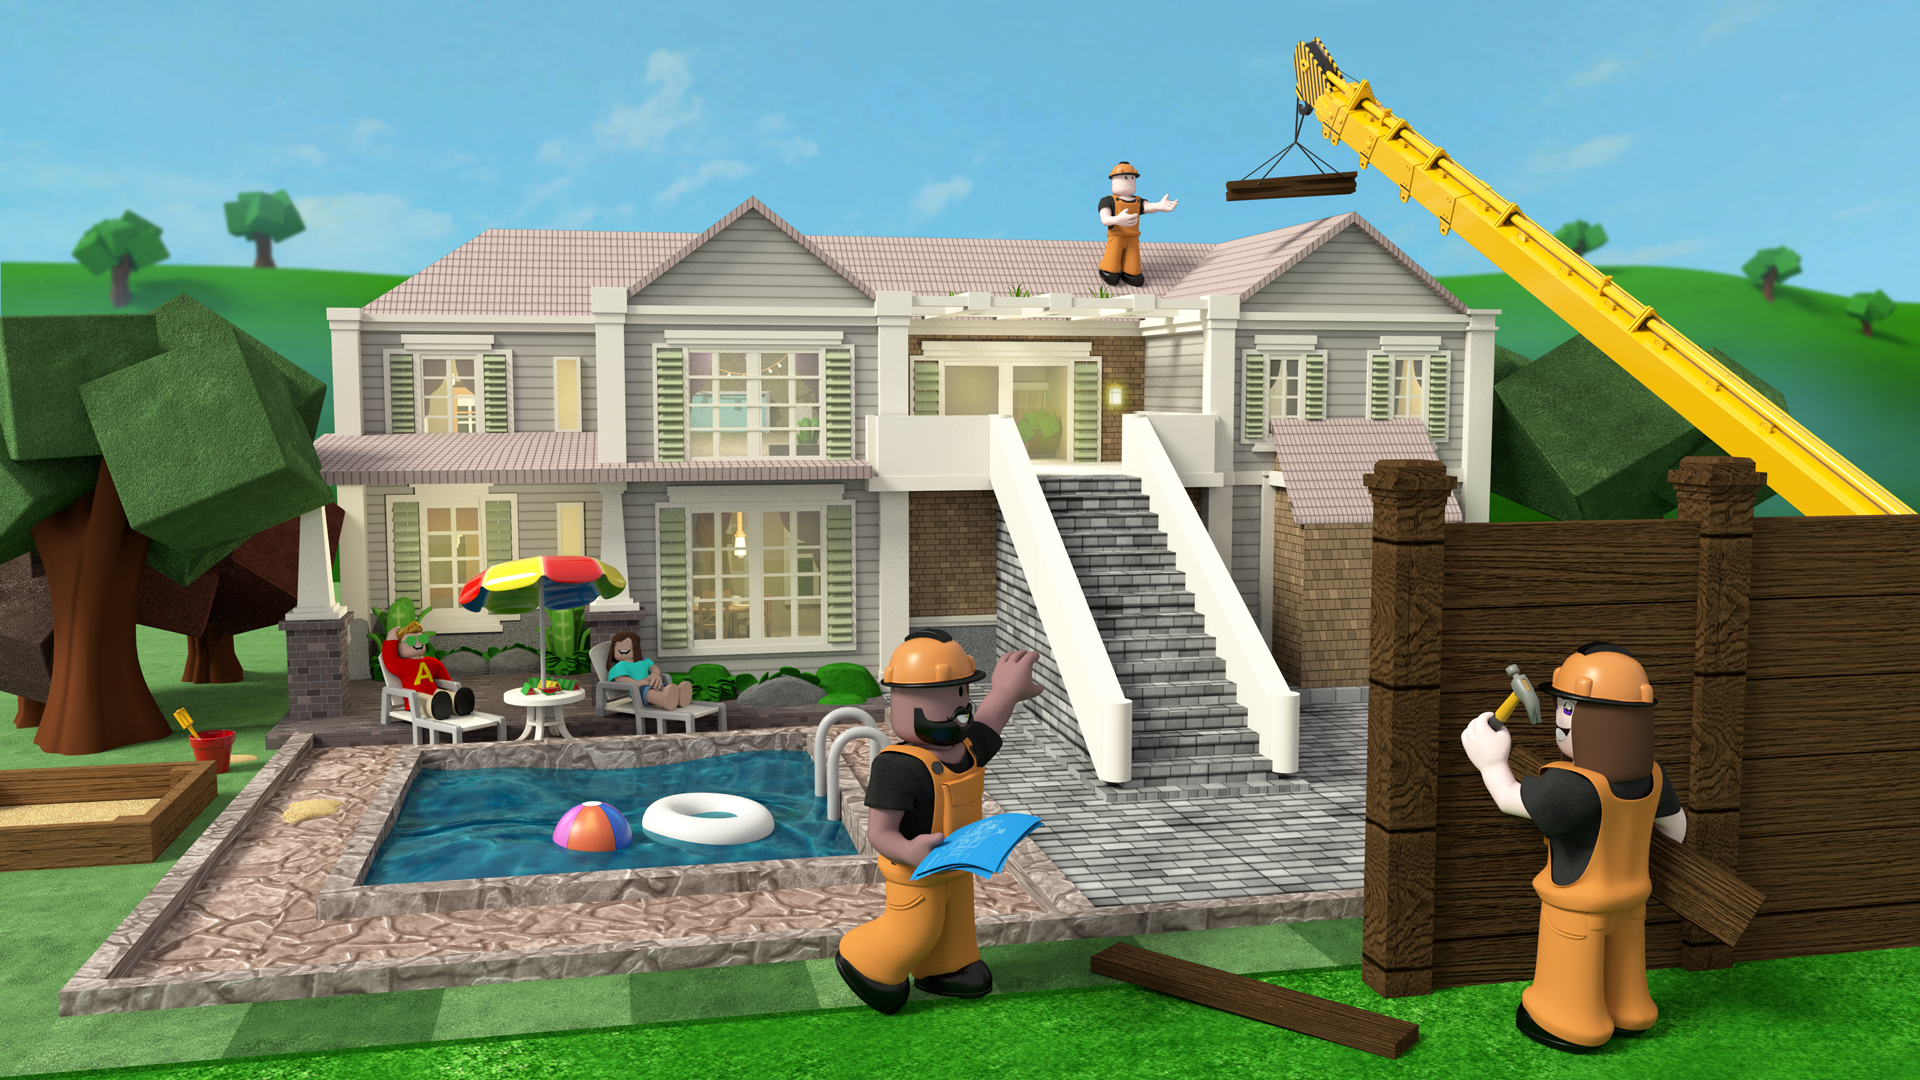 An Inside Look At Roblox The Gaming Universe That S Exploded To 164 000 000 Users By Spero Ventures Spero Ventures Sep 2020 Medium - roblox songs if we go down together